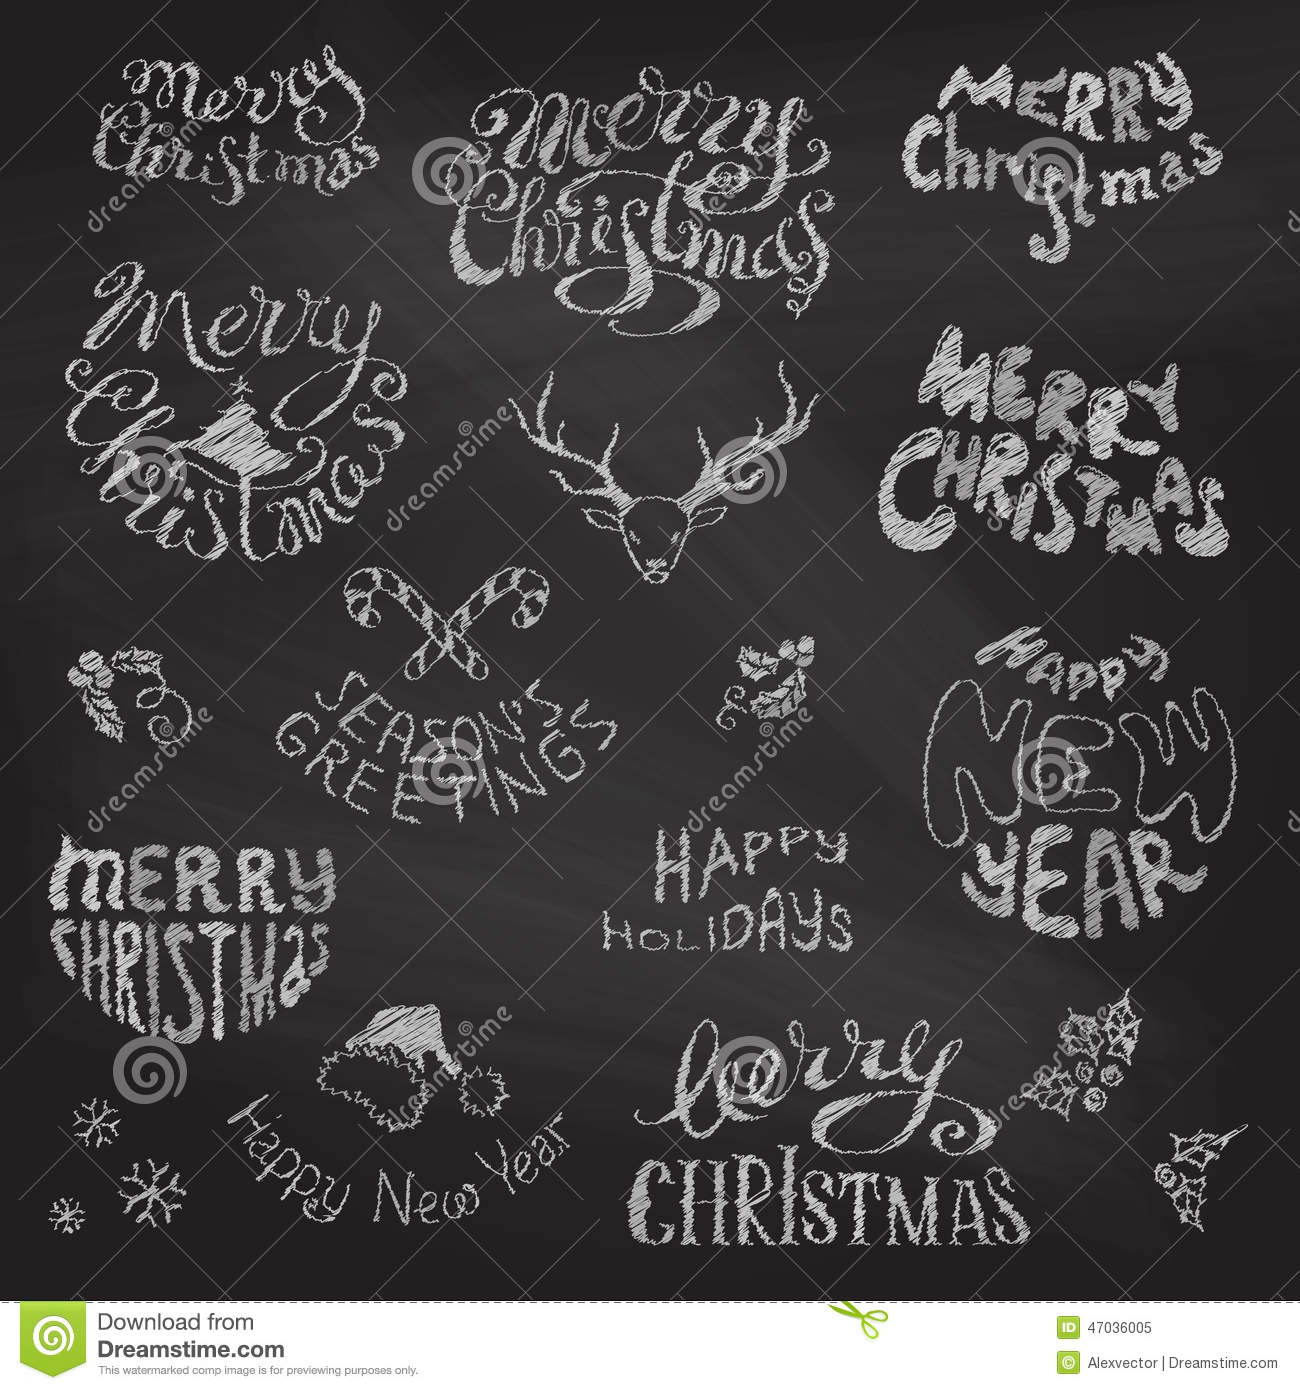 Chalkboard Christmas Icons And Festive Elements  Stock Vector   Image    